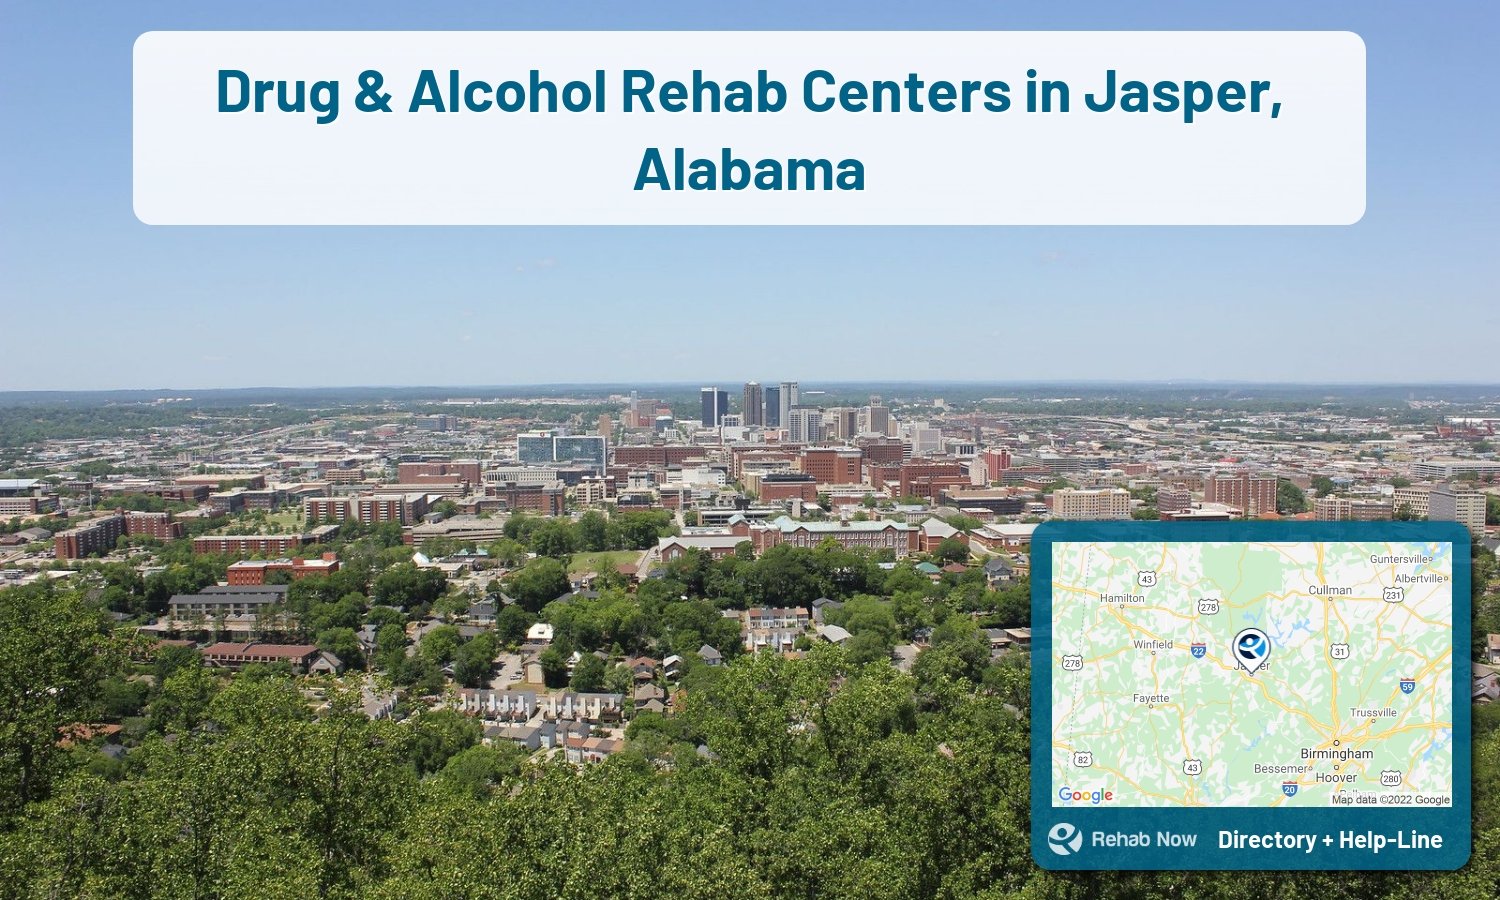 Our experts can help you find treatment now in Jasper, Alabama. We list drug rehab and alcohol centers in Alabama.